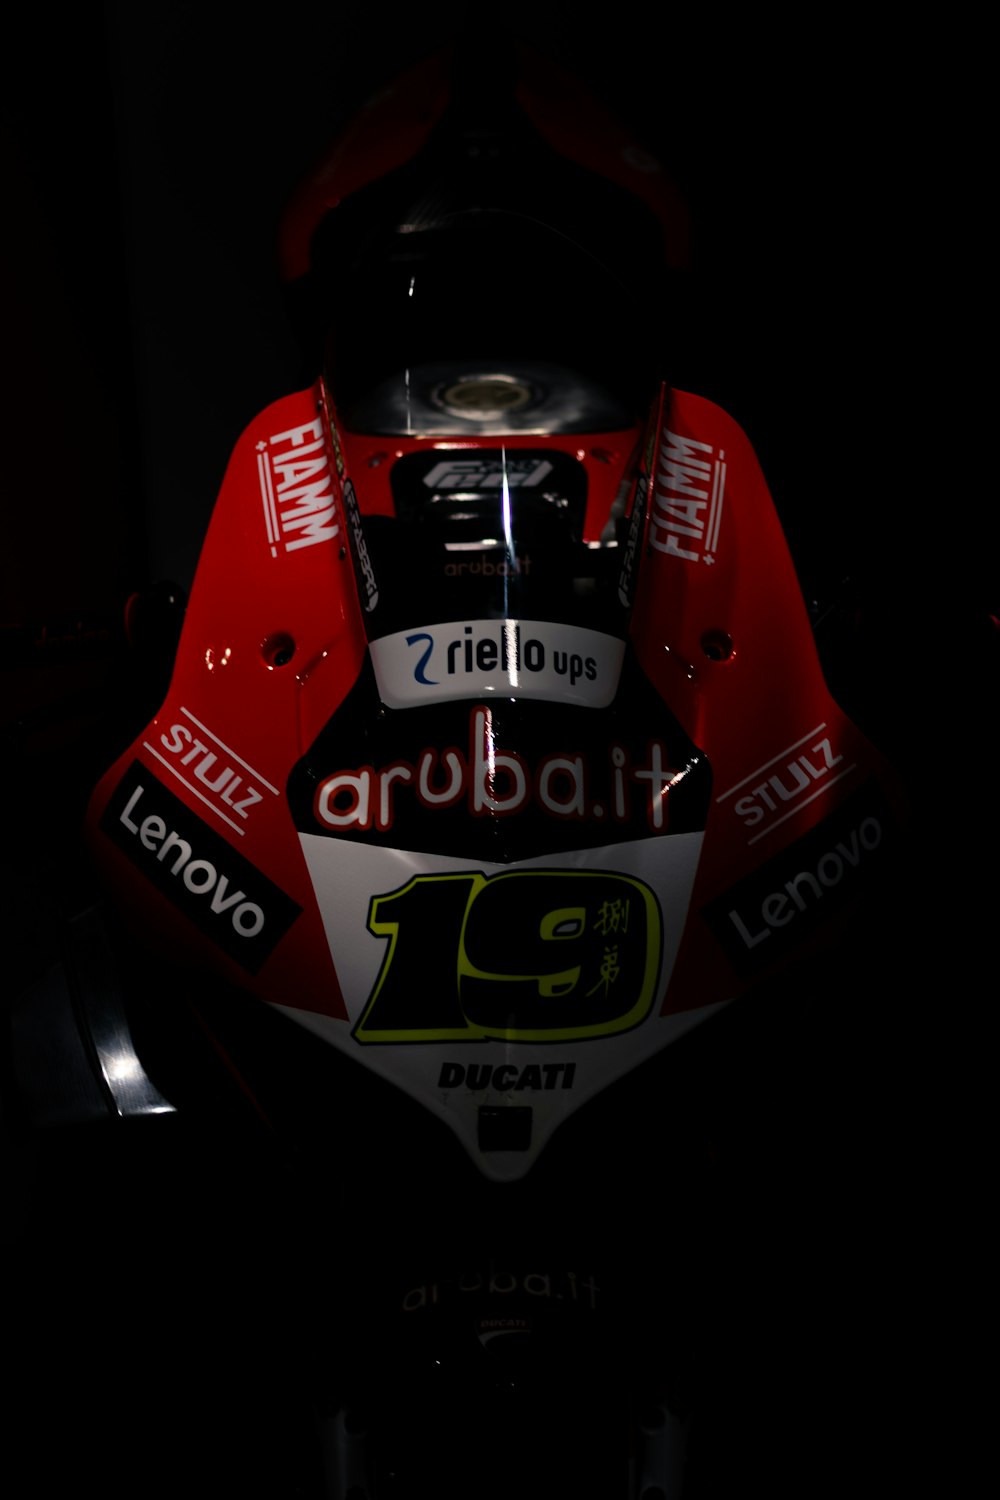 a close up of a motorcycle in the dark